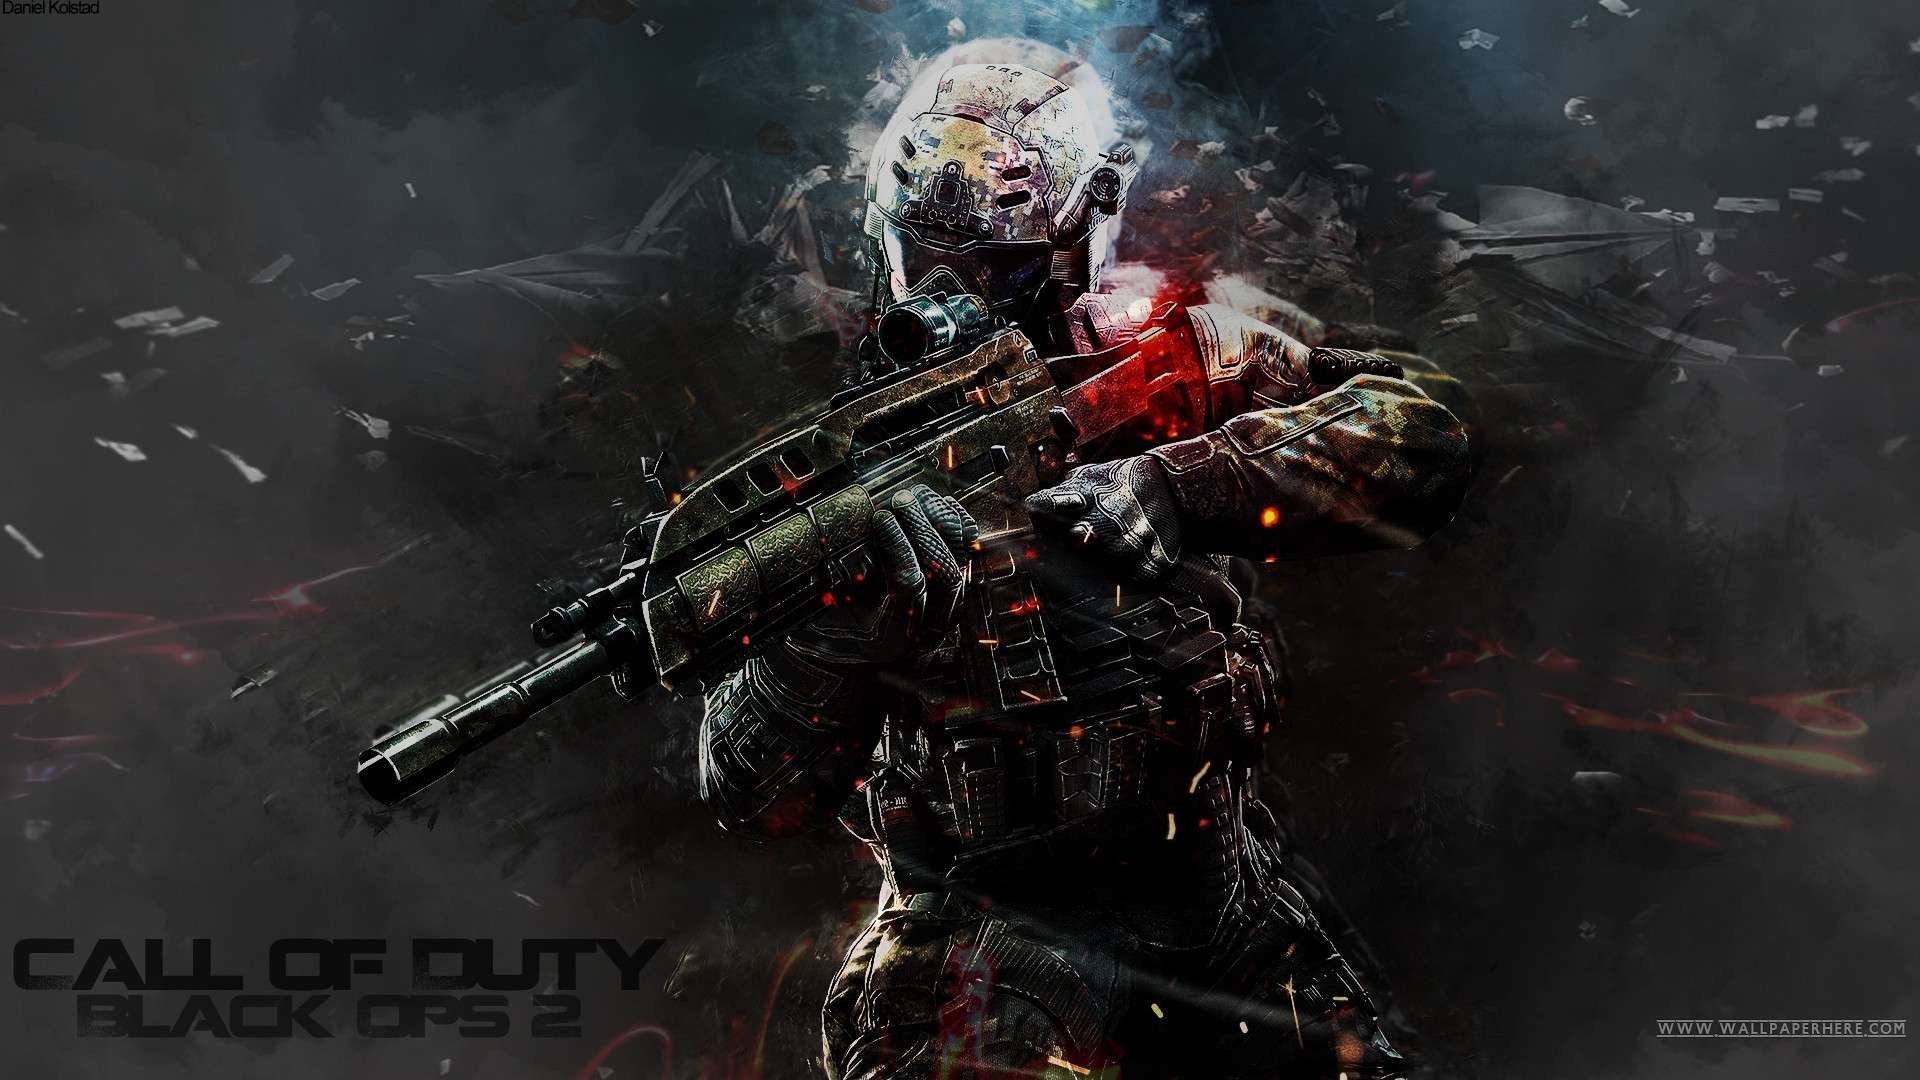 1920x1080 View Of Call Of Duty Game Desktop Wallpaper : Nice Wallpapers